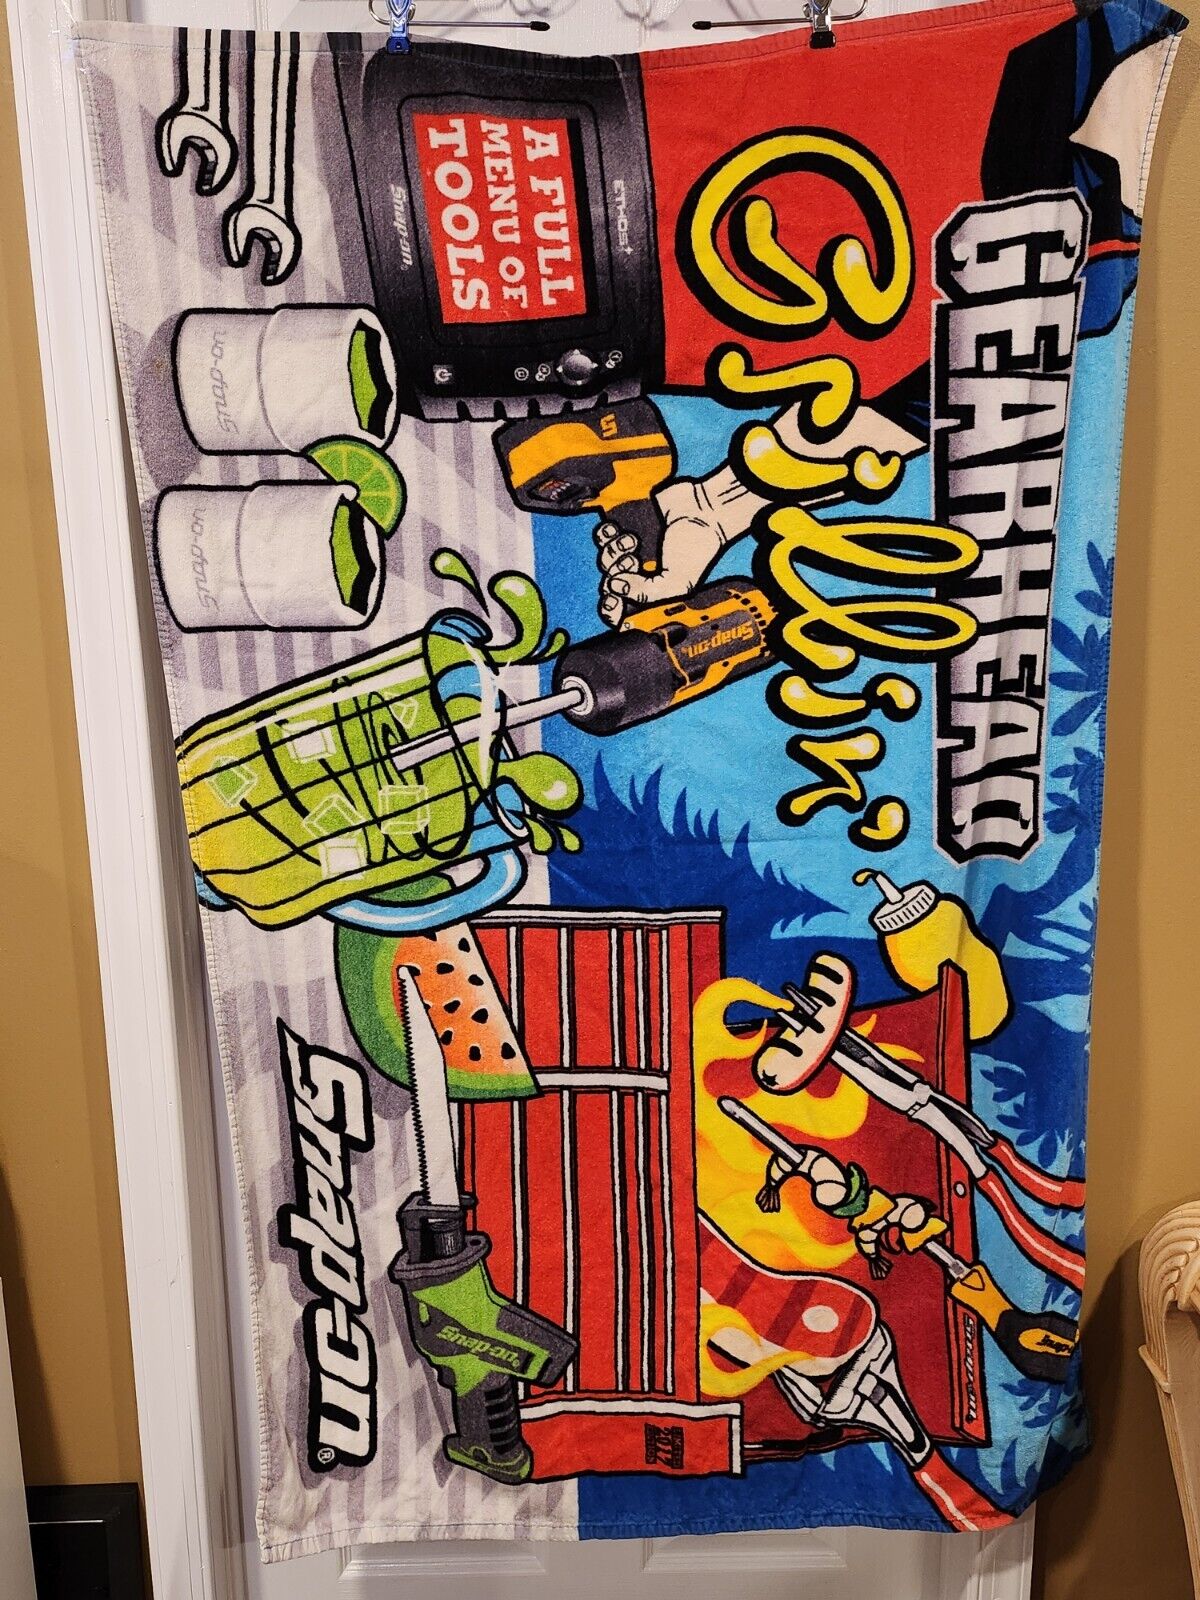 2017 Snap-On Tools Beach Towel Gearhead Grillin 36x54 Limited Edition